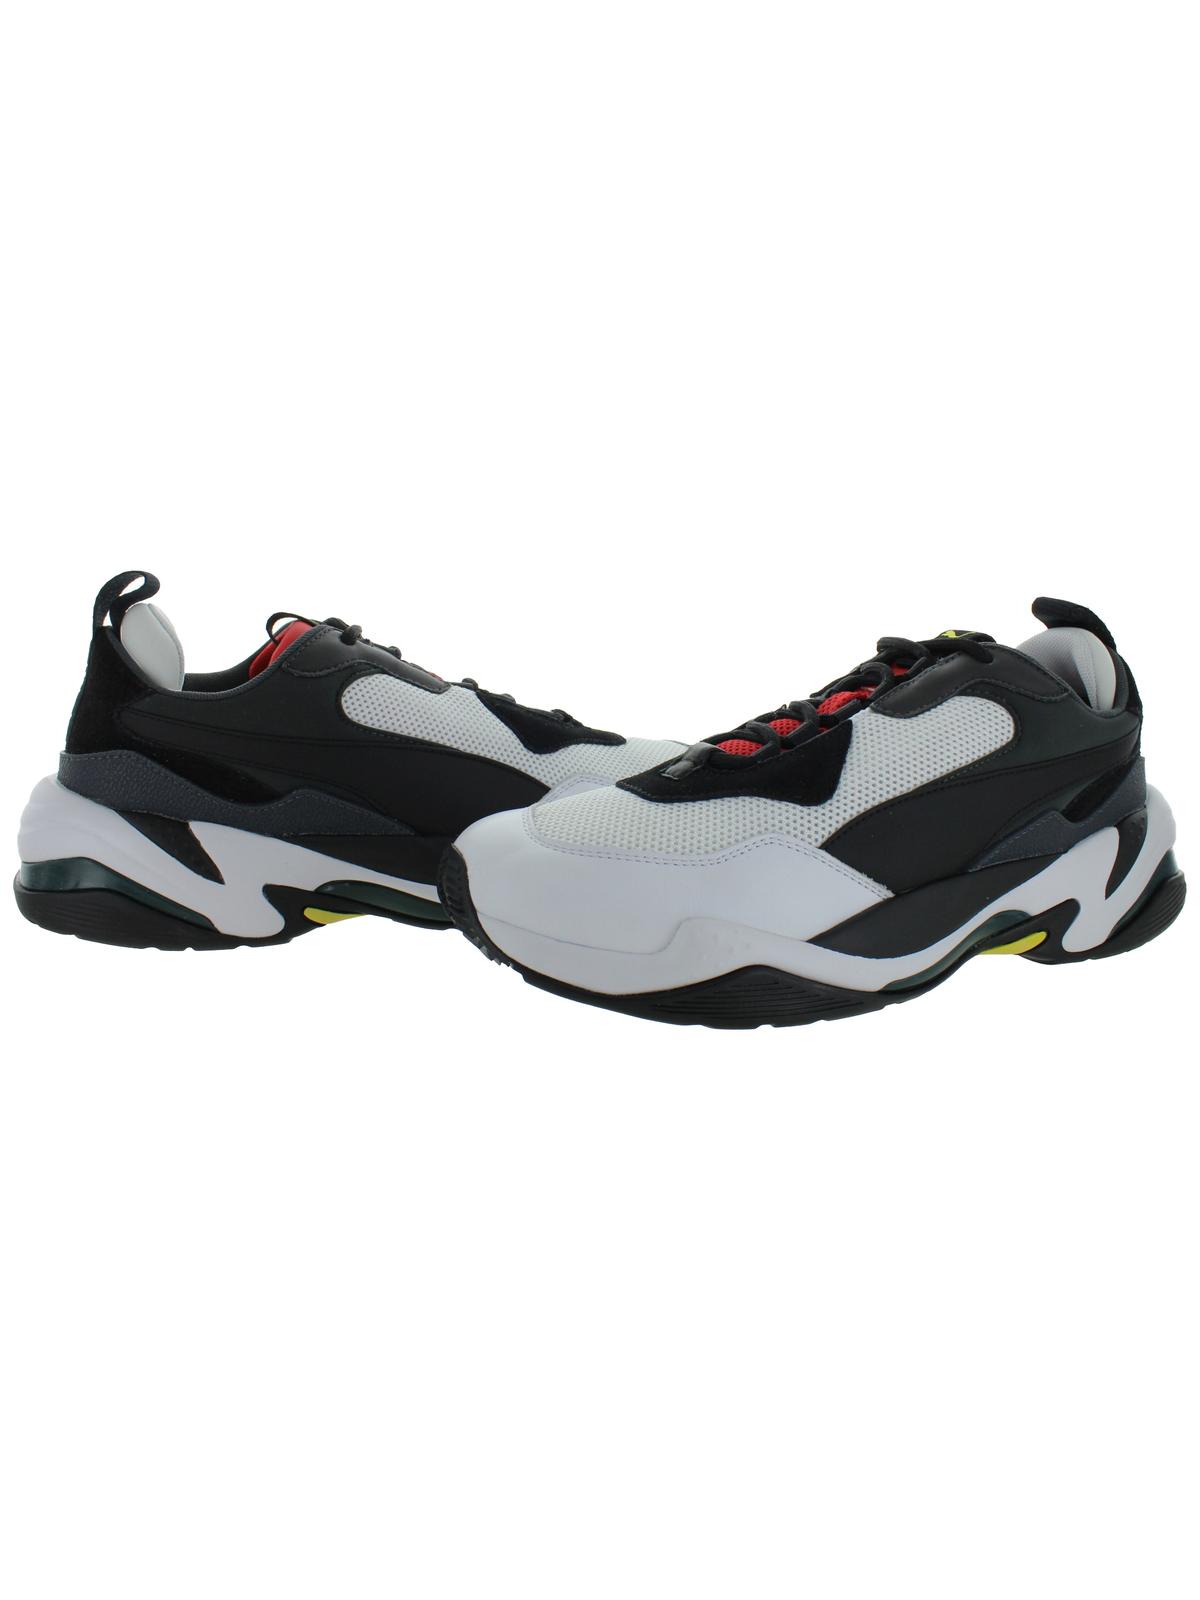 Puma Mens Thunder Spectra Leather Casual Running, Cross Training Shoes - image 2 of 3